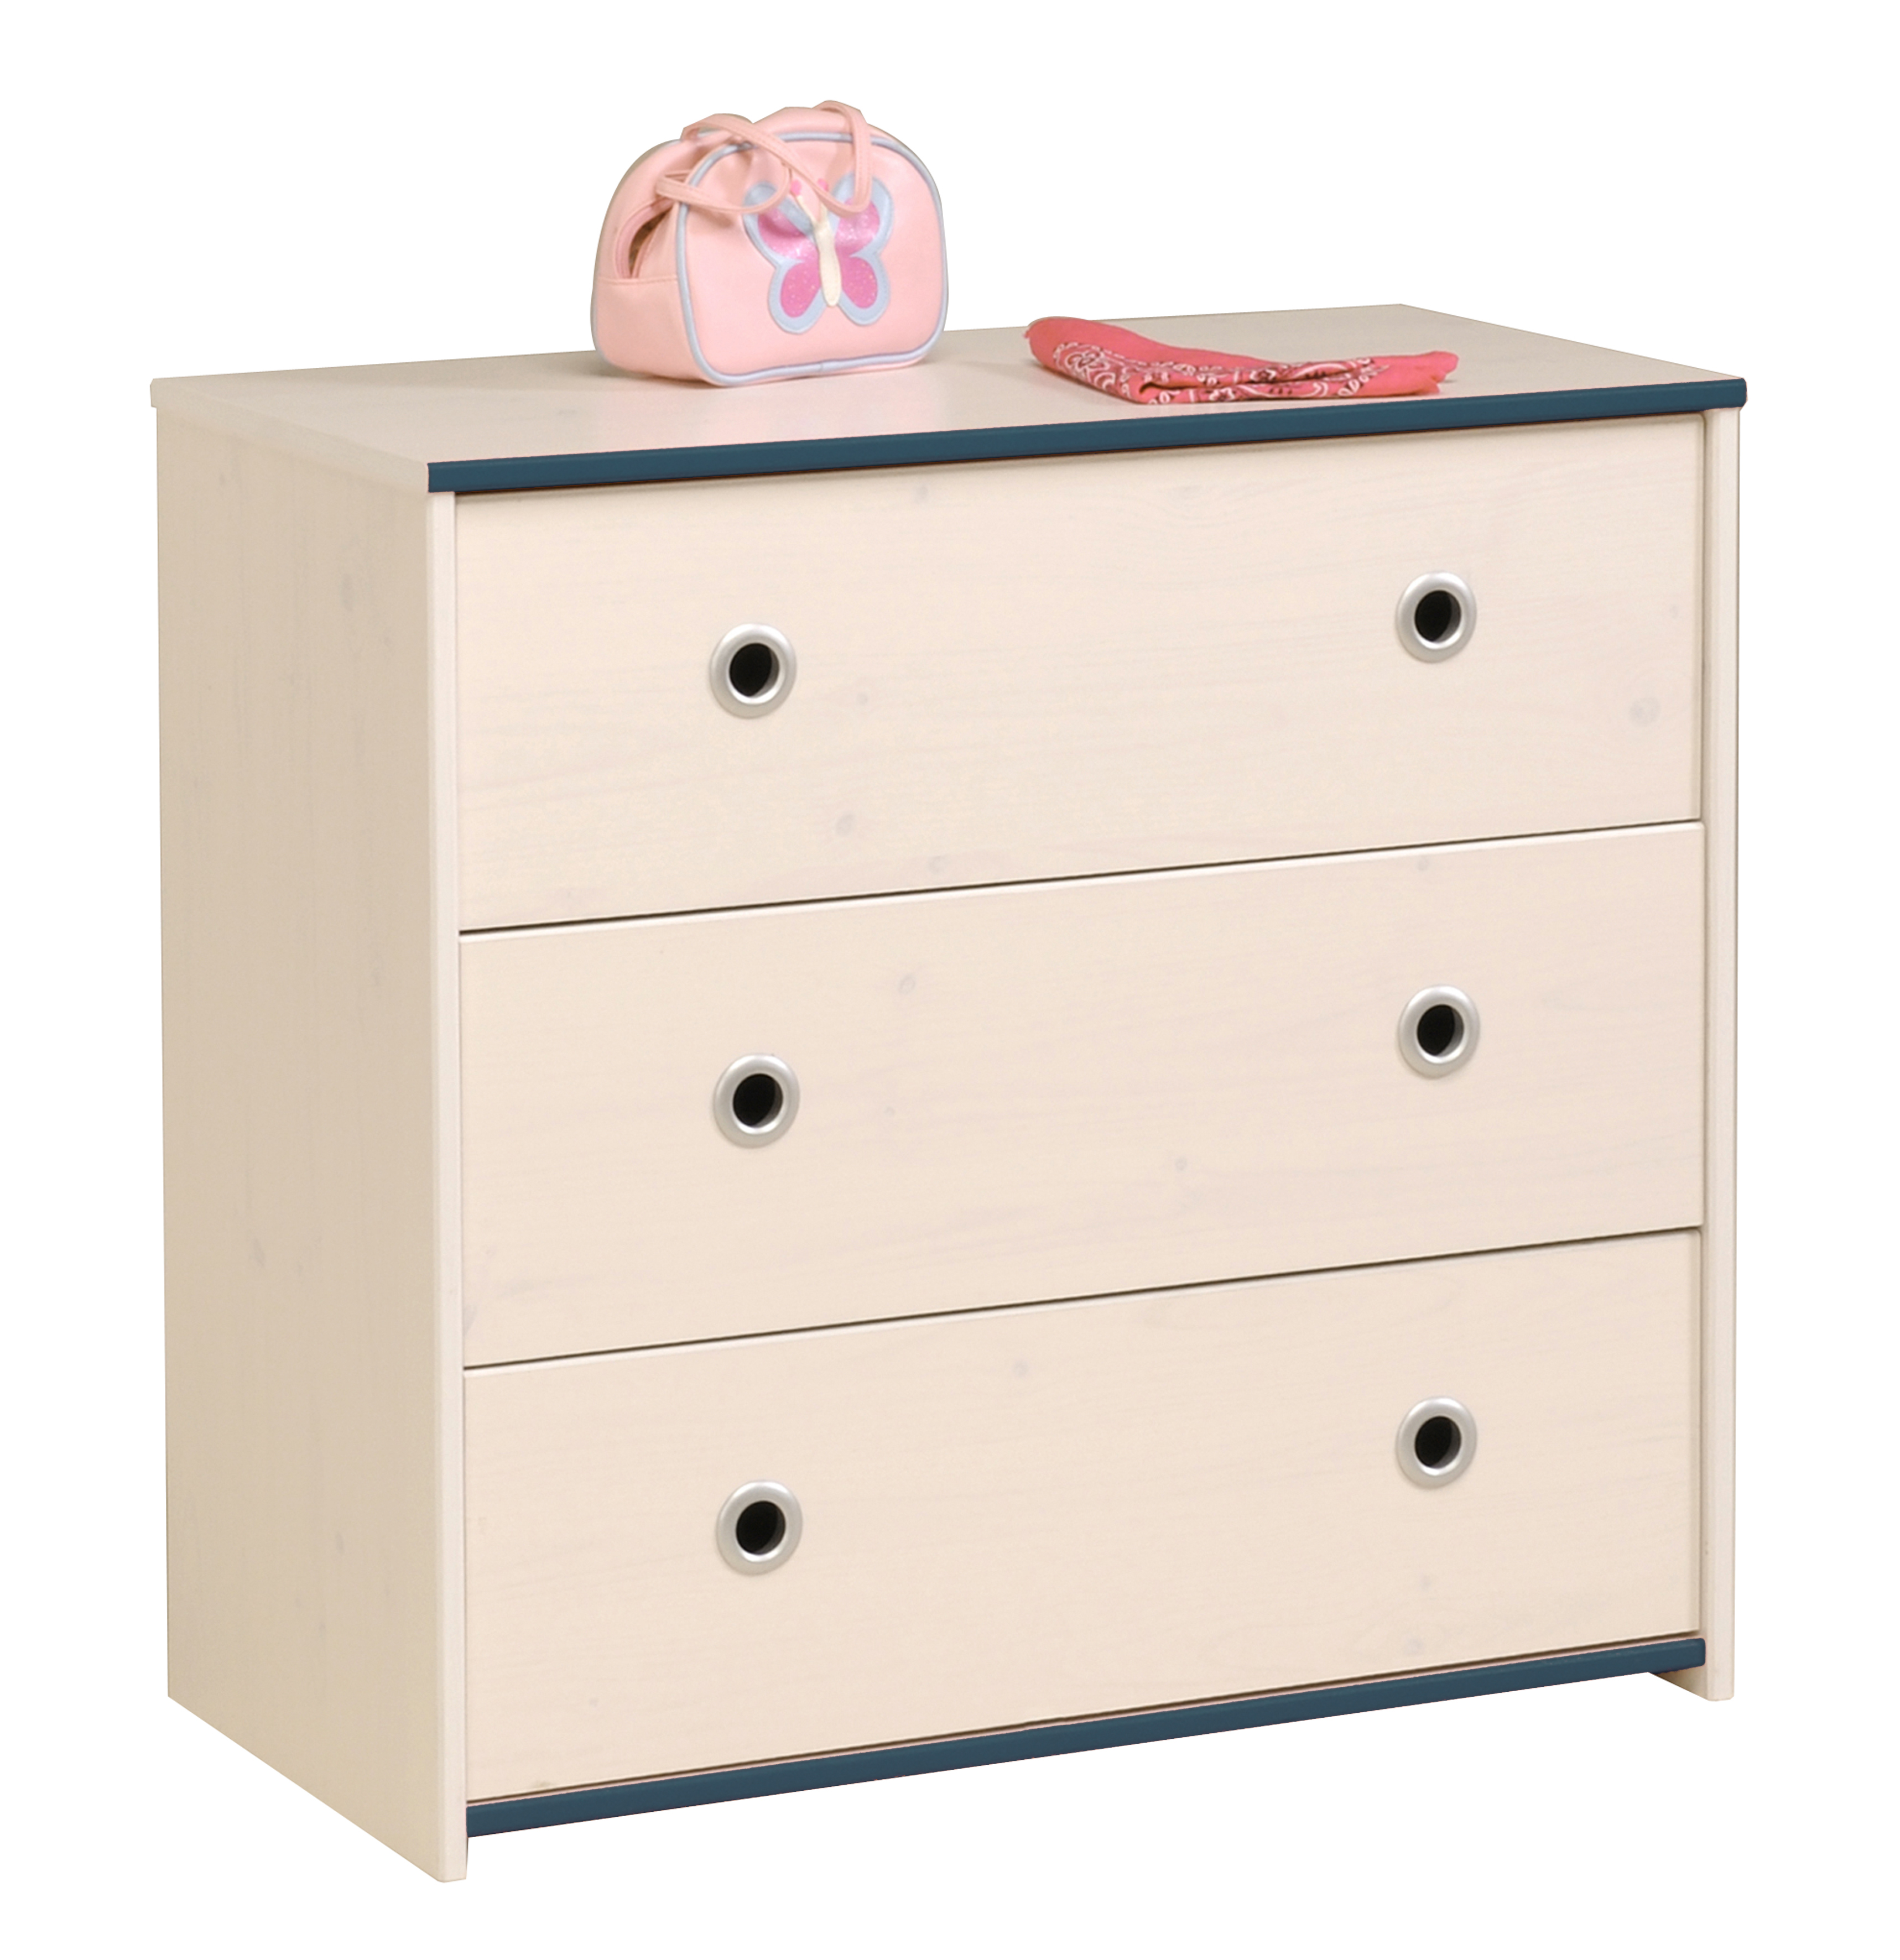 Parisot Smoozy Pink or Blue Chest of Drawers